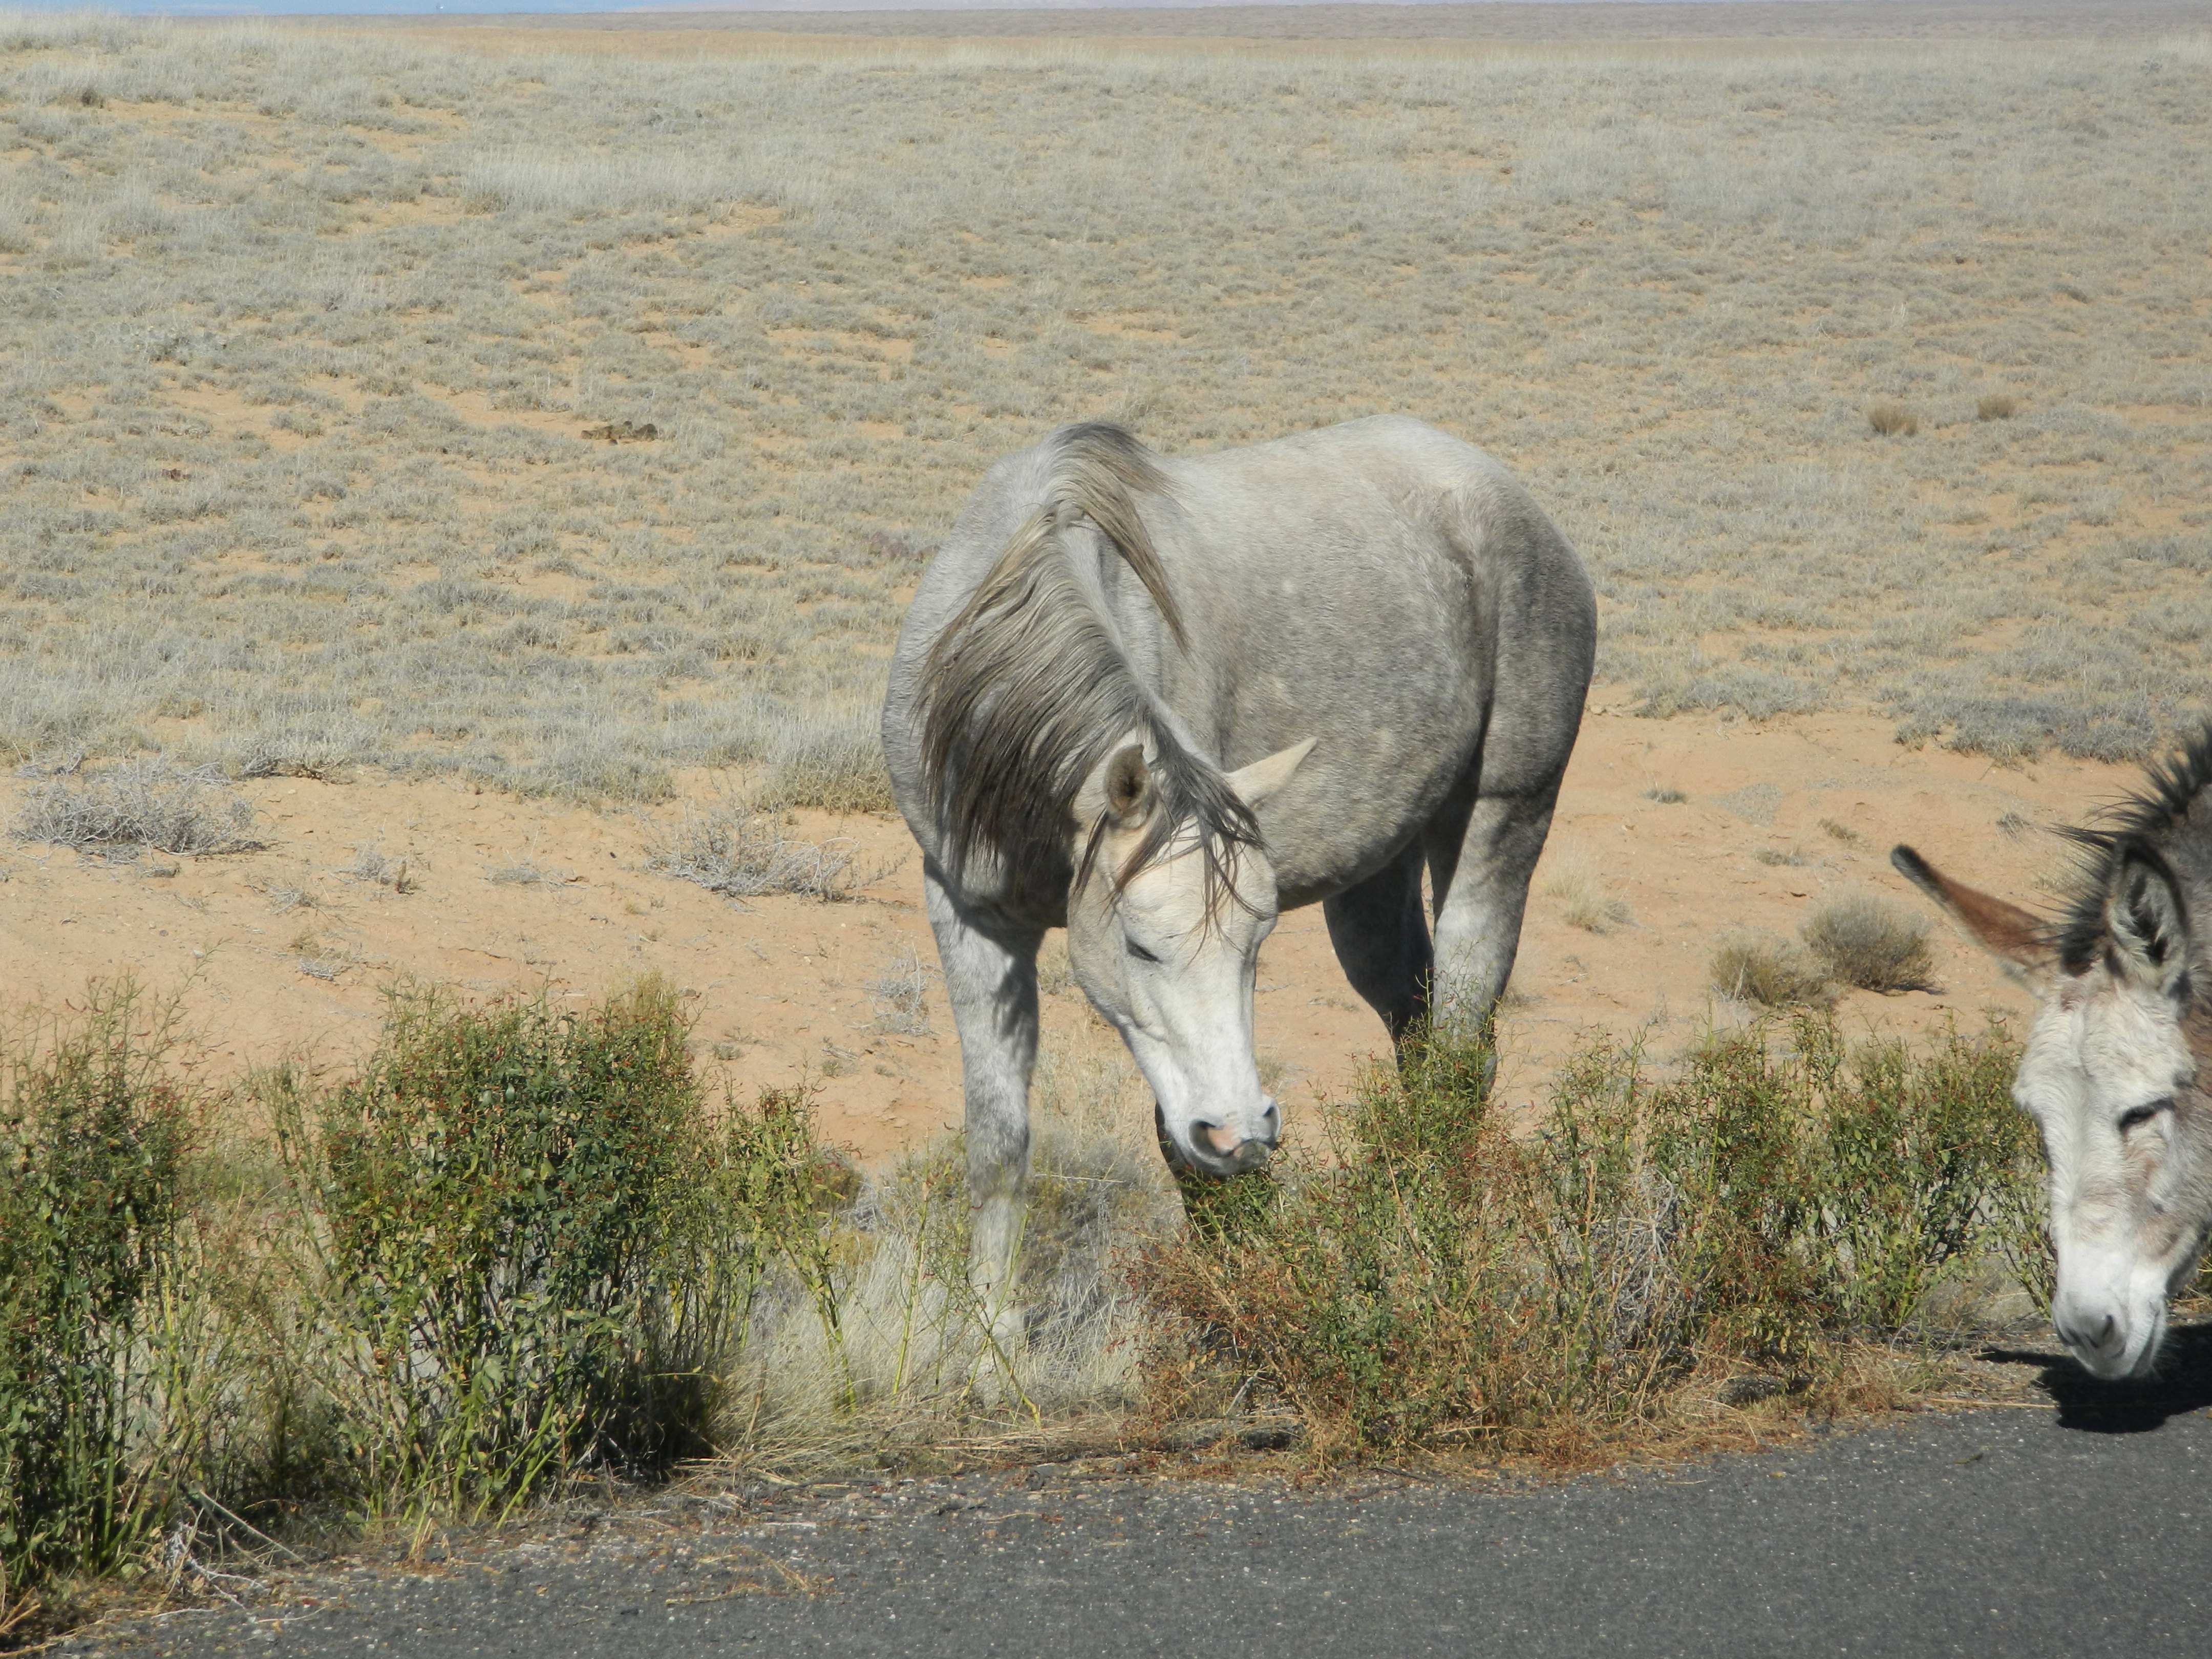 Horse grazing on camelthorn at a roadside